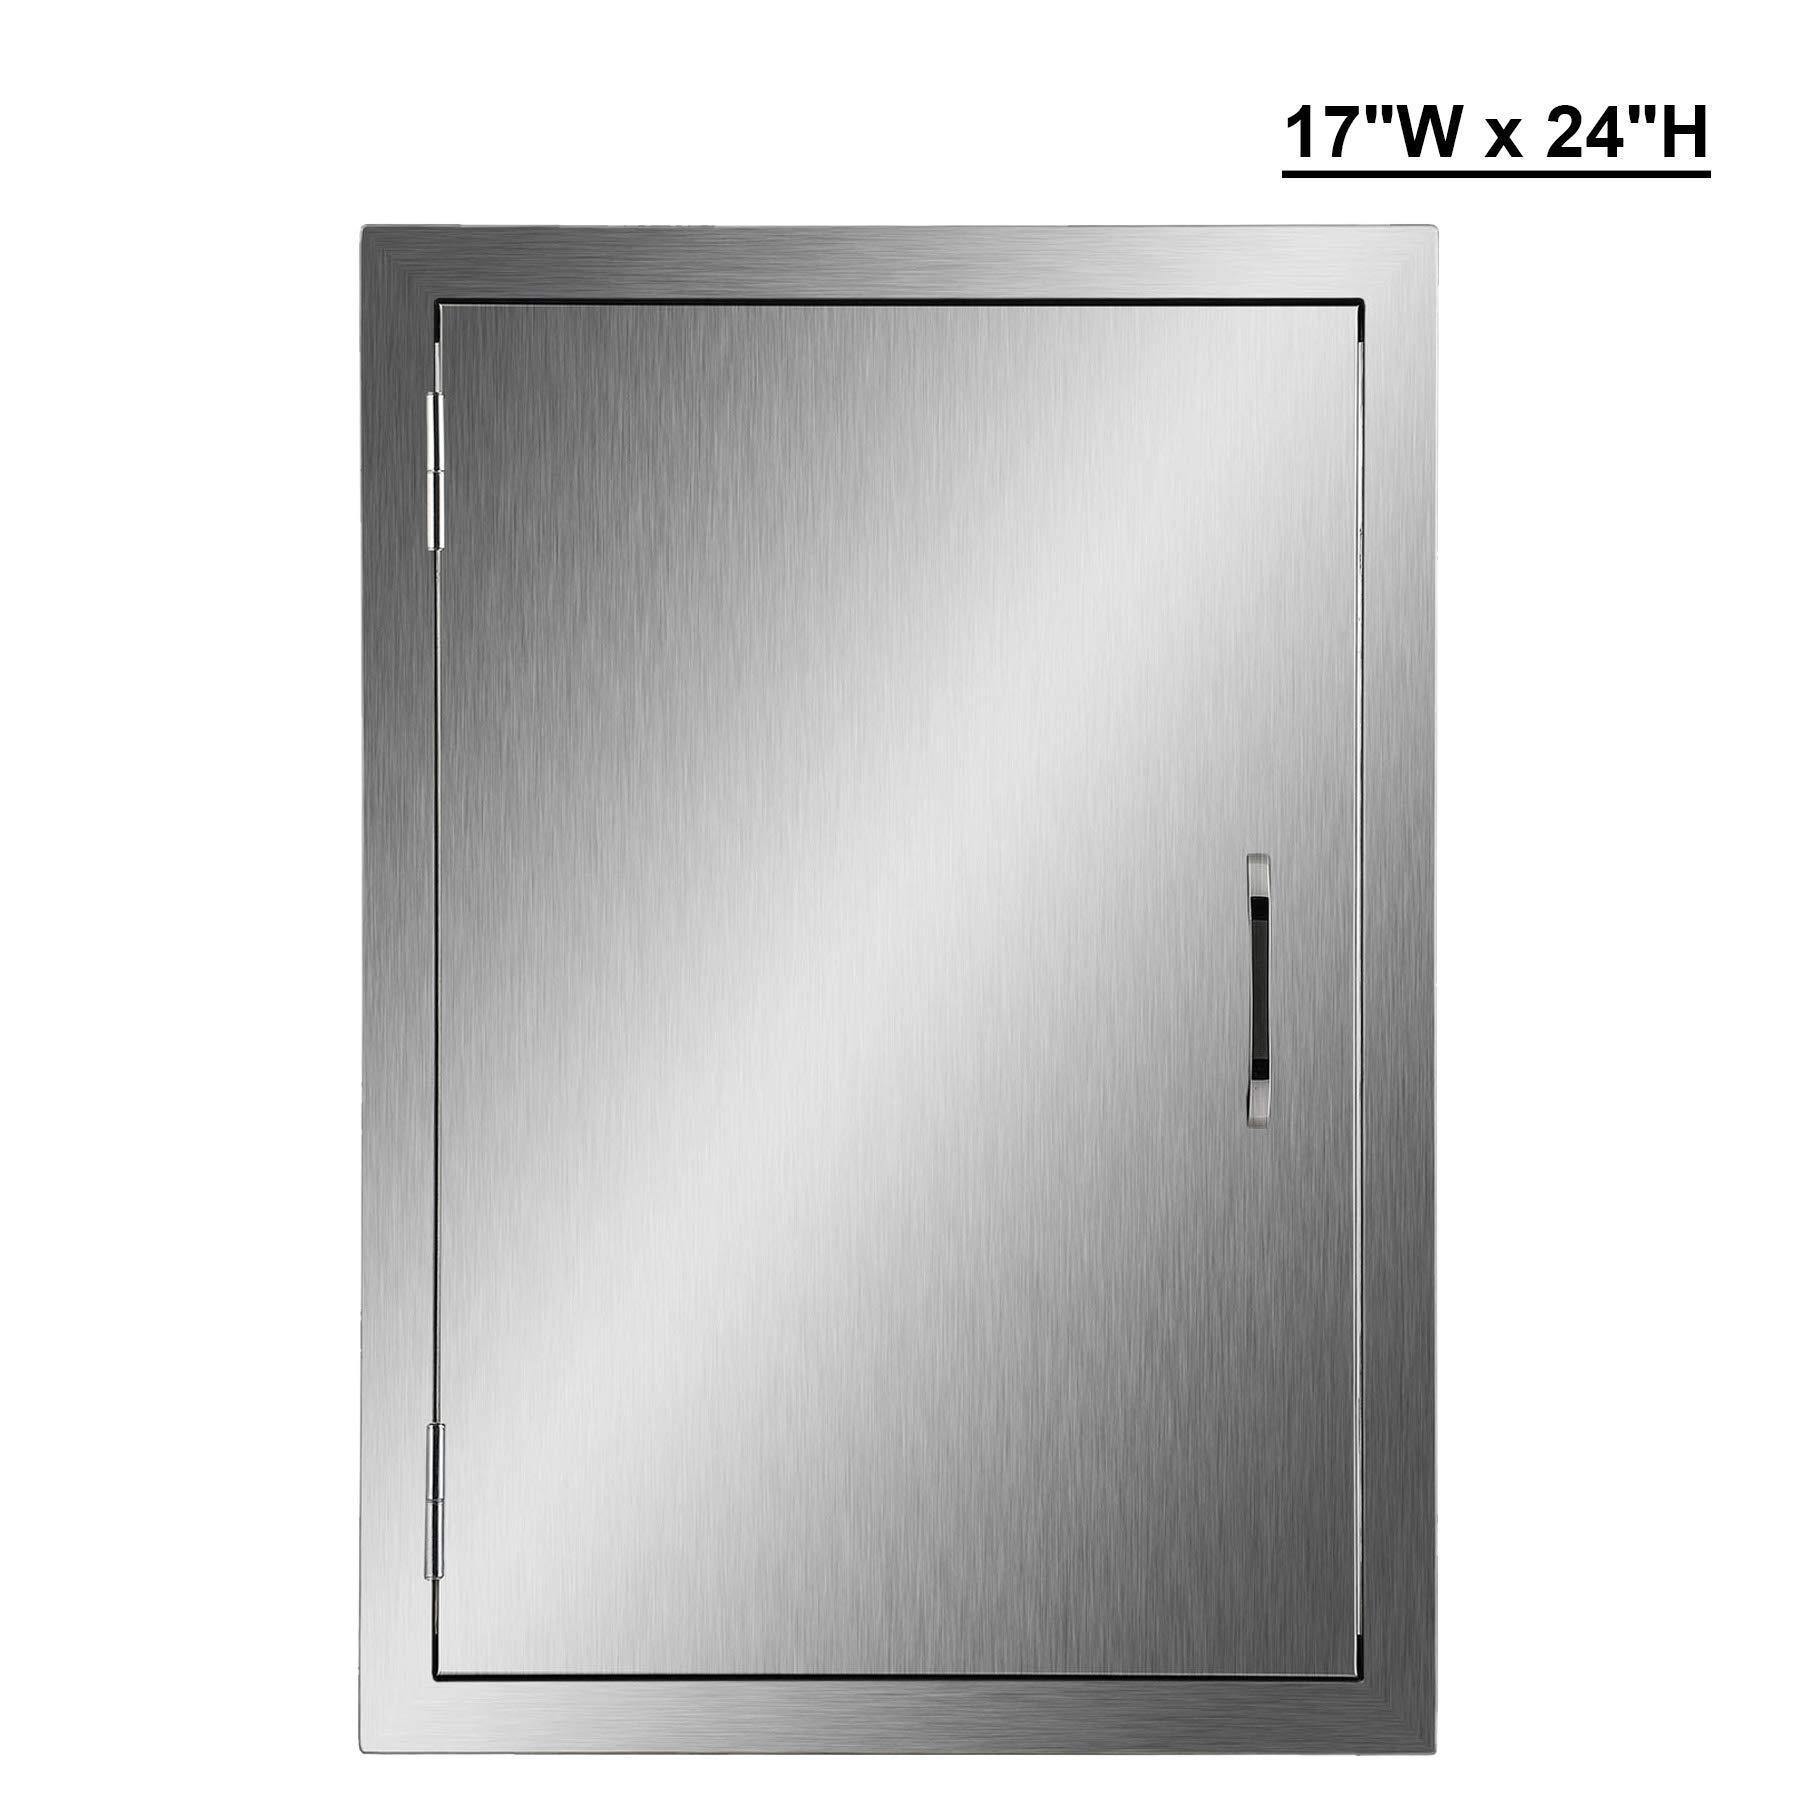 Storage organizer co z 304 brushed stainless steel bbq door ss single access doors for outdoor kitchen commercial bbq island grilling station outside cabinet barbeque grill built in